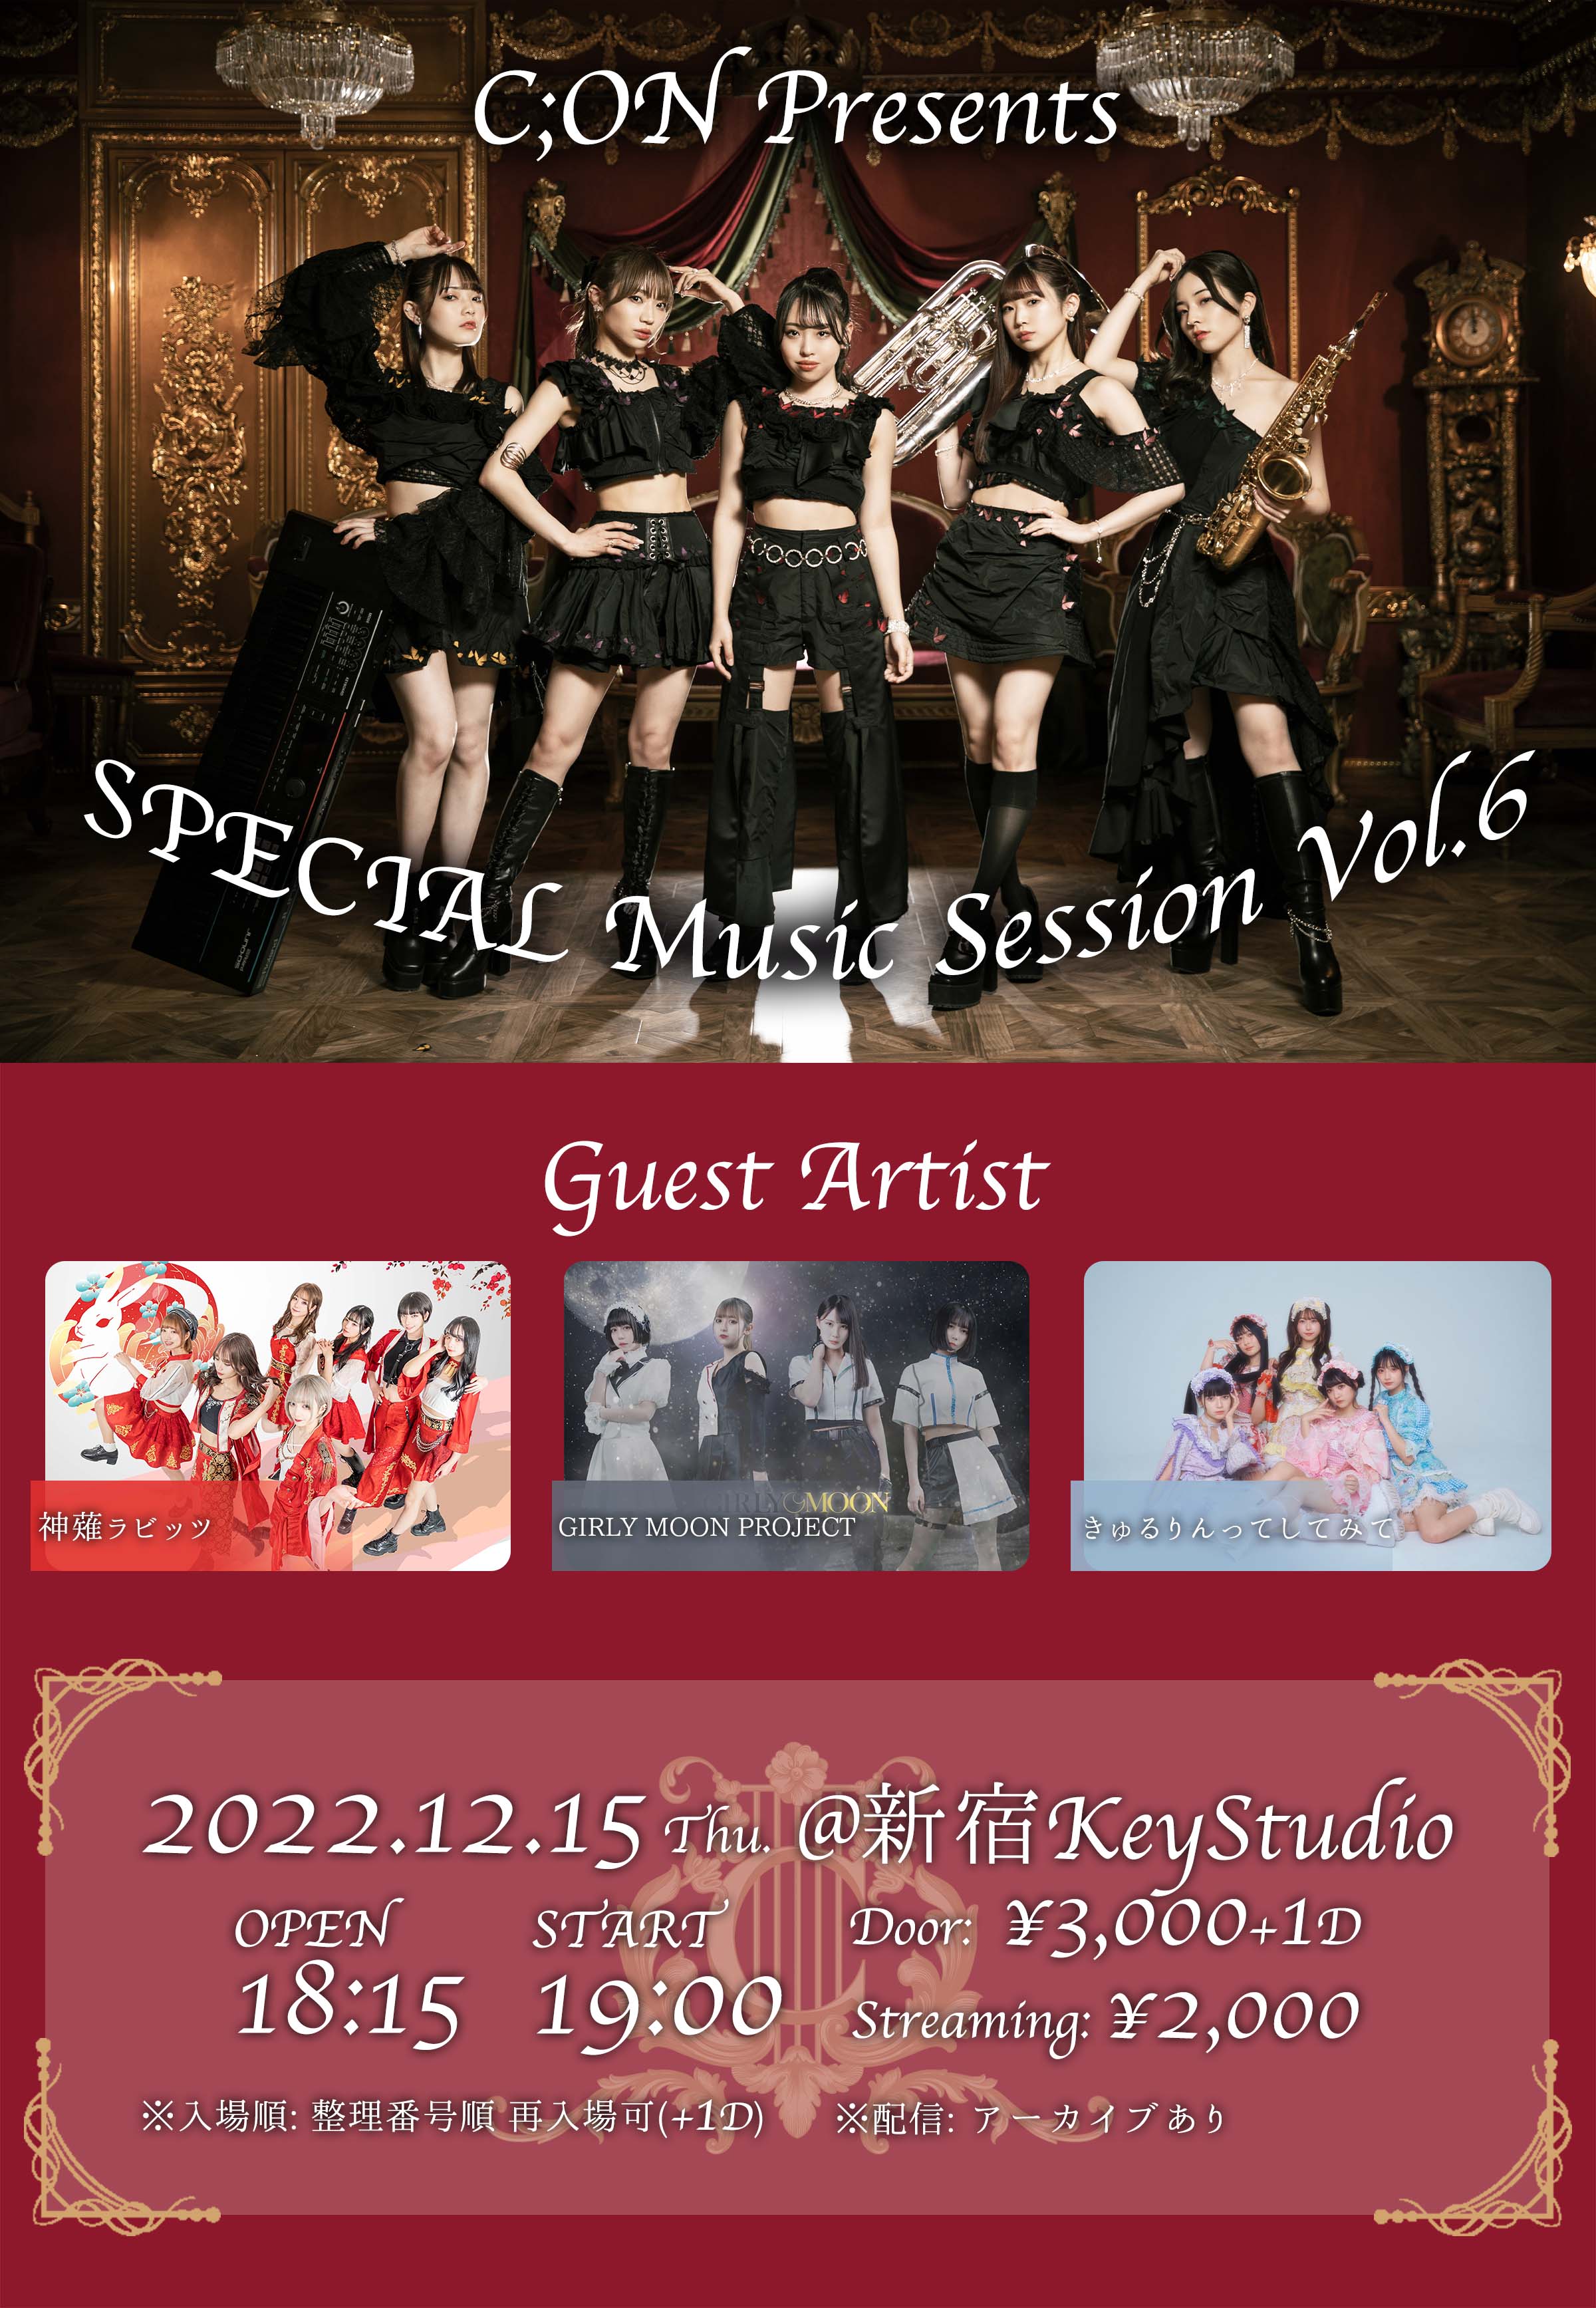 C;ON presents SPECIAL Music Session 🎶vol.6